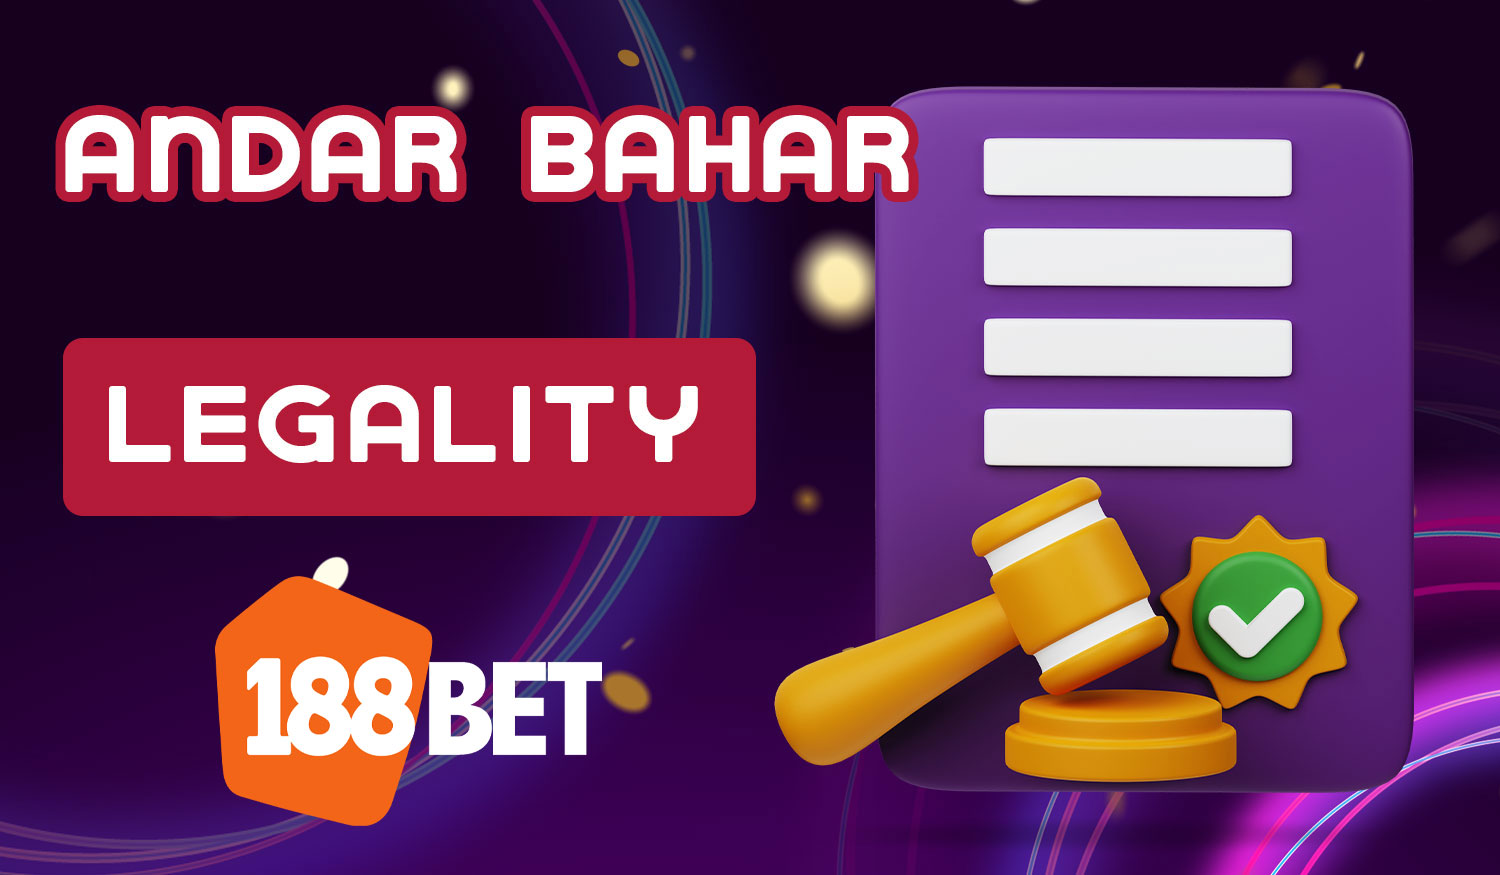 The bookmaker 188Bet is fully legal in the territory of India